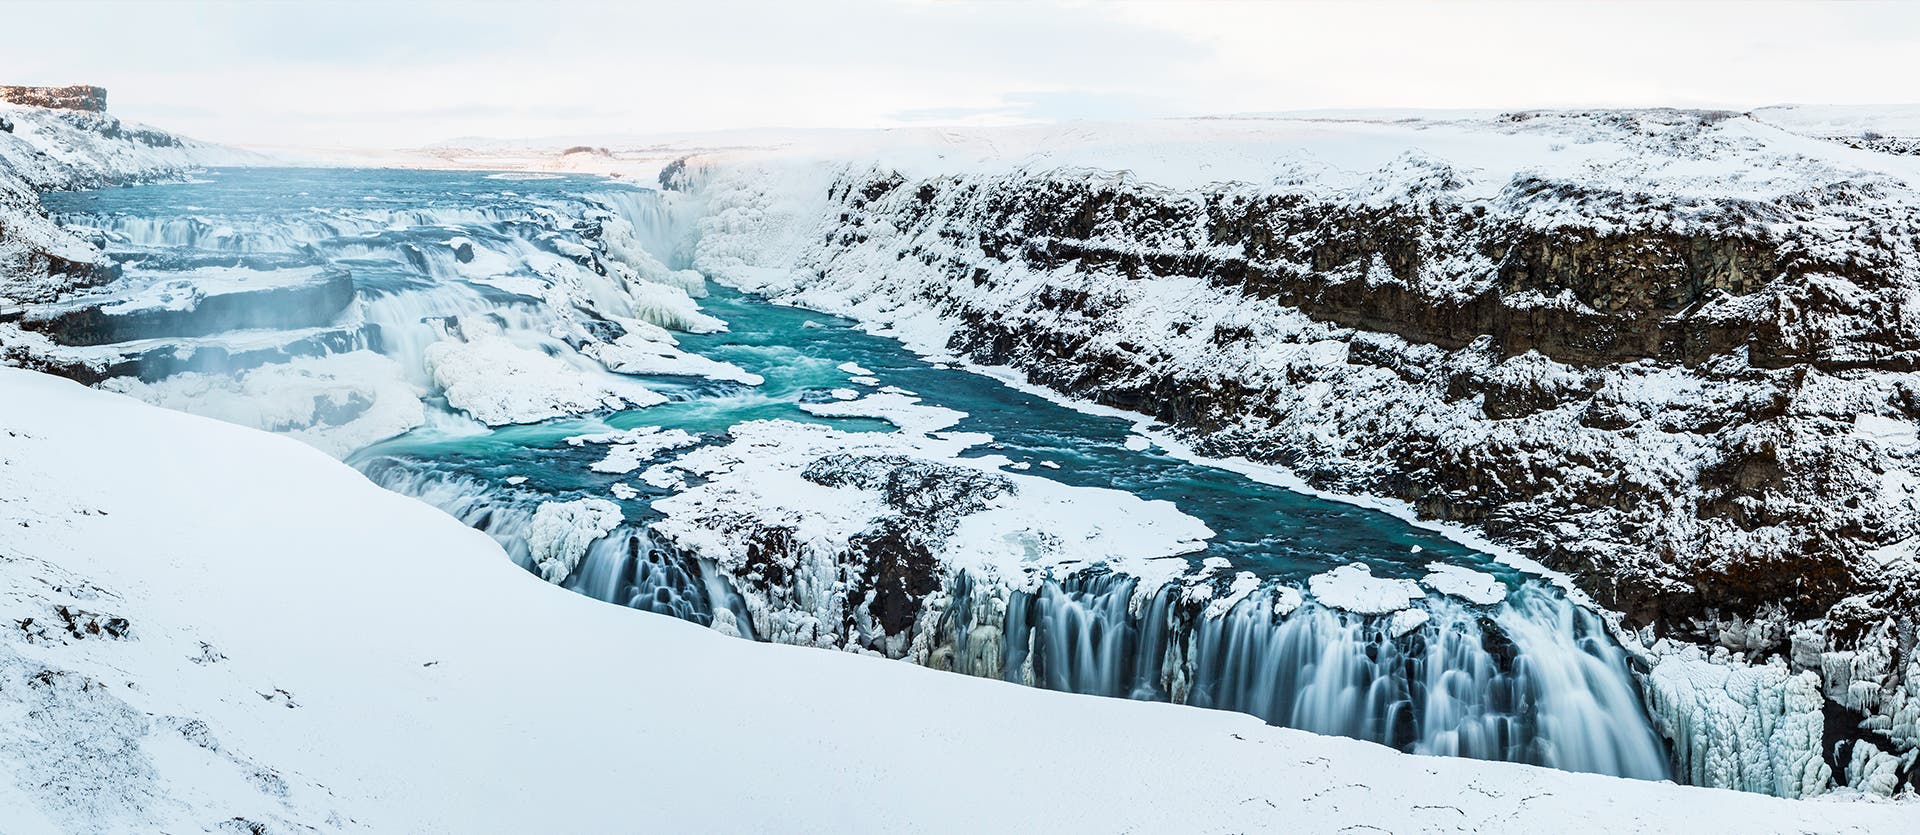 What to see in Islande Gullfoss Waterfall